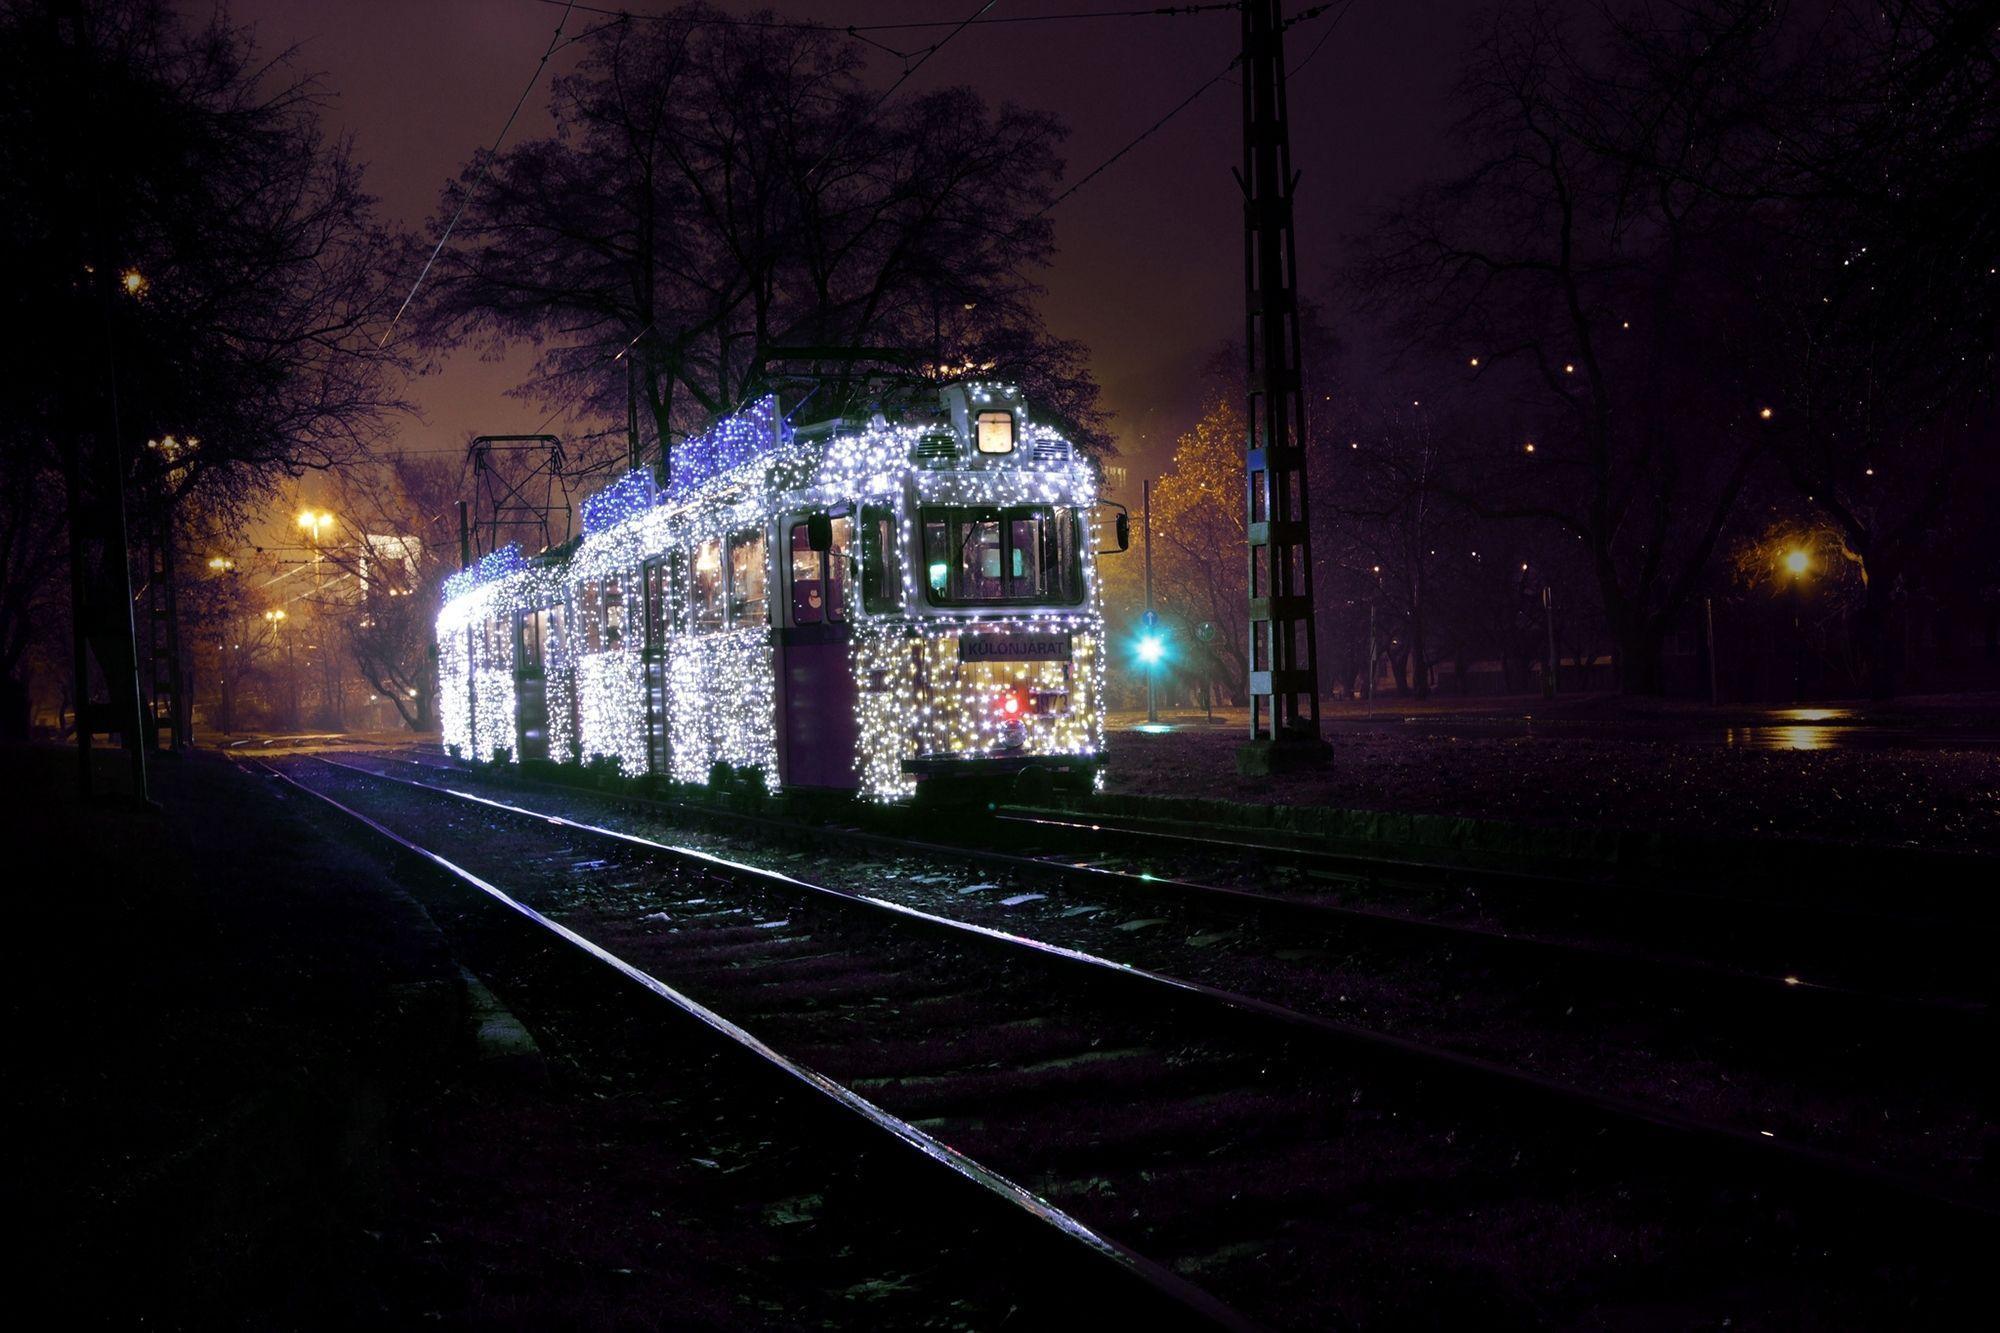 Train Covered with Holiday Lights, Budapest, Hungary widescreen